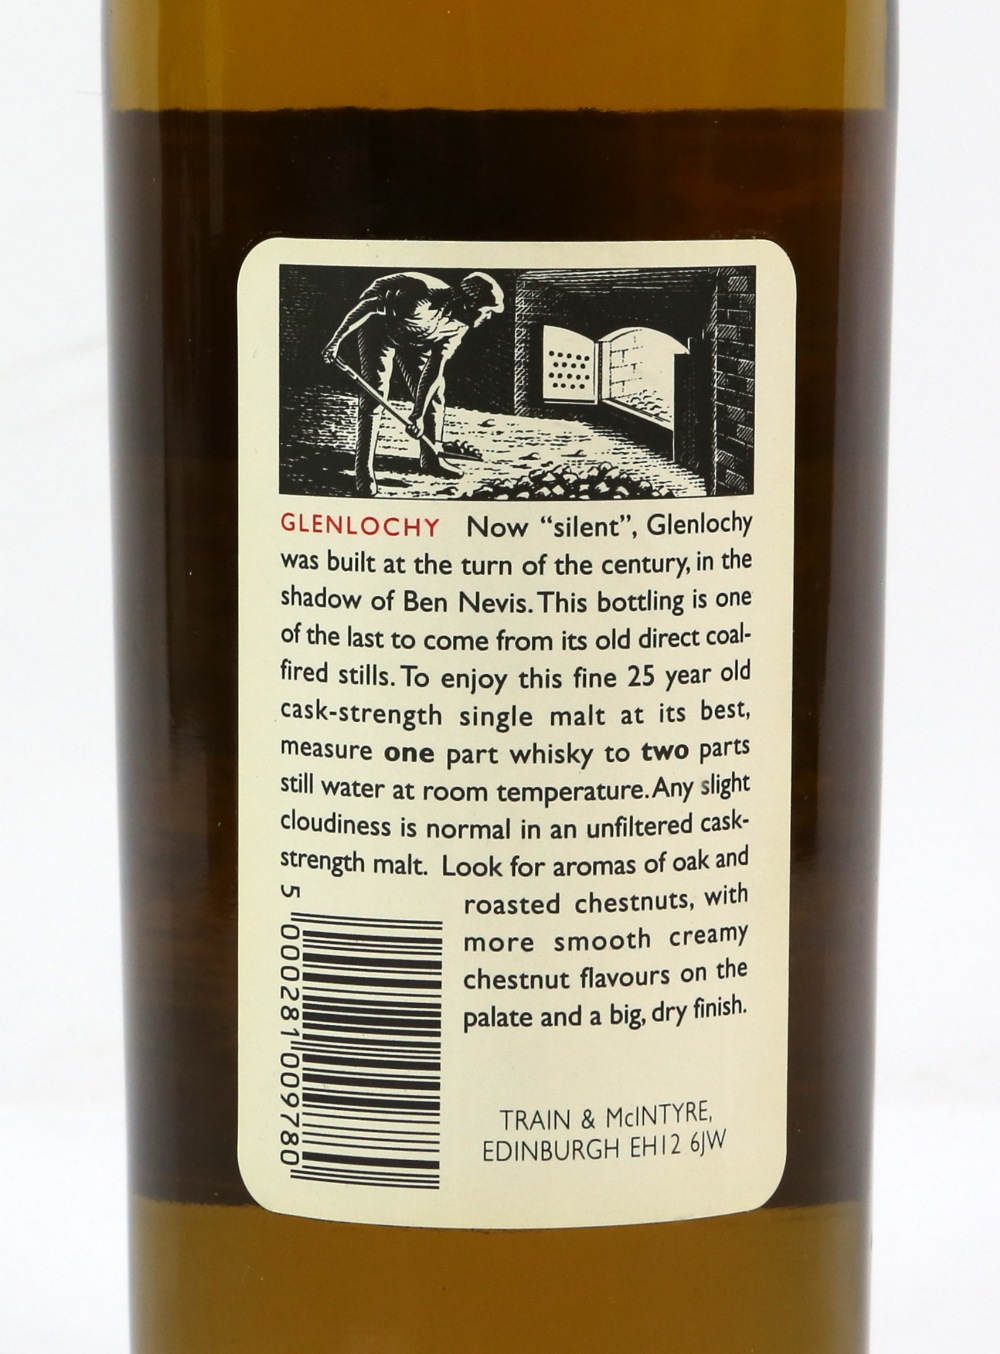 One bottle of Glenlochy 1969 Rare Malt 25 Year Old Natural Cask Strength Whisky, limited edition - Image 5 of 5